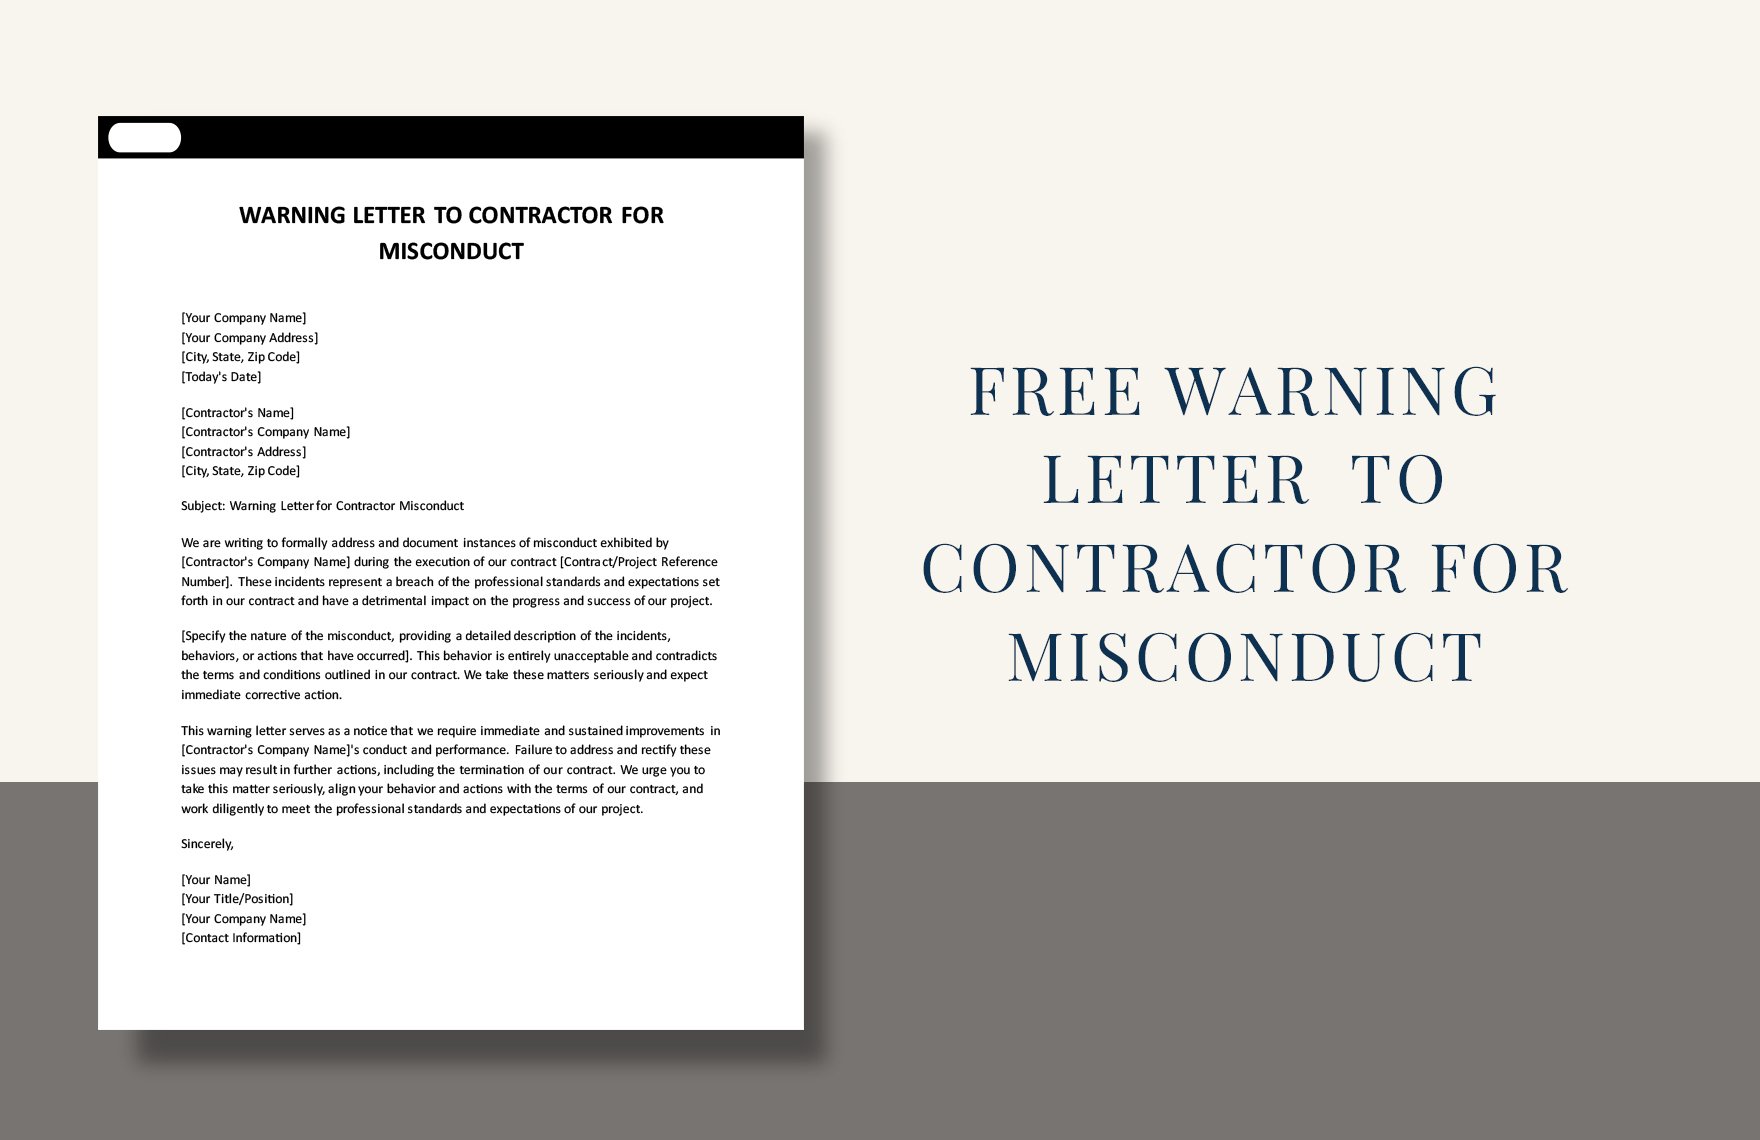 Warning Letter To Contractor For Misconduct